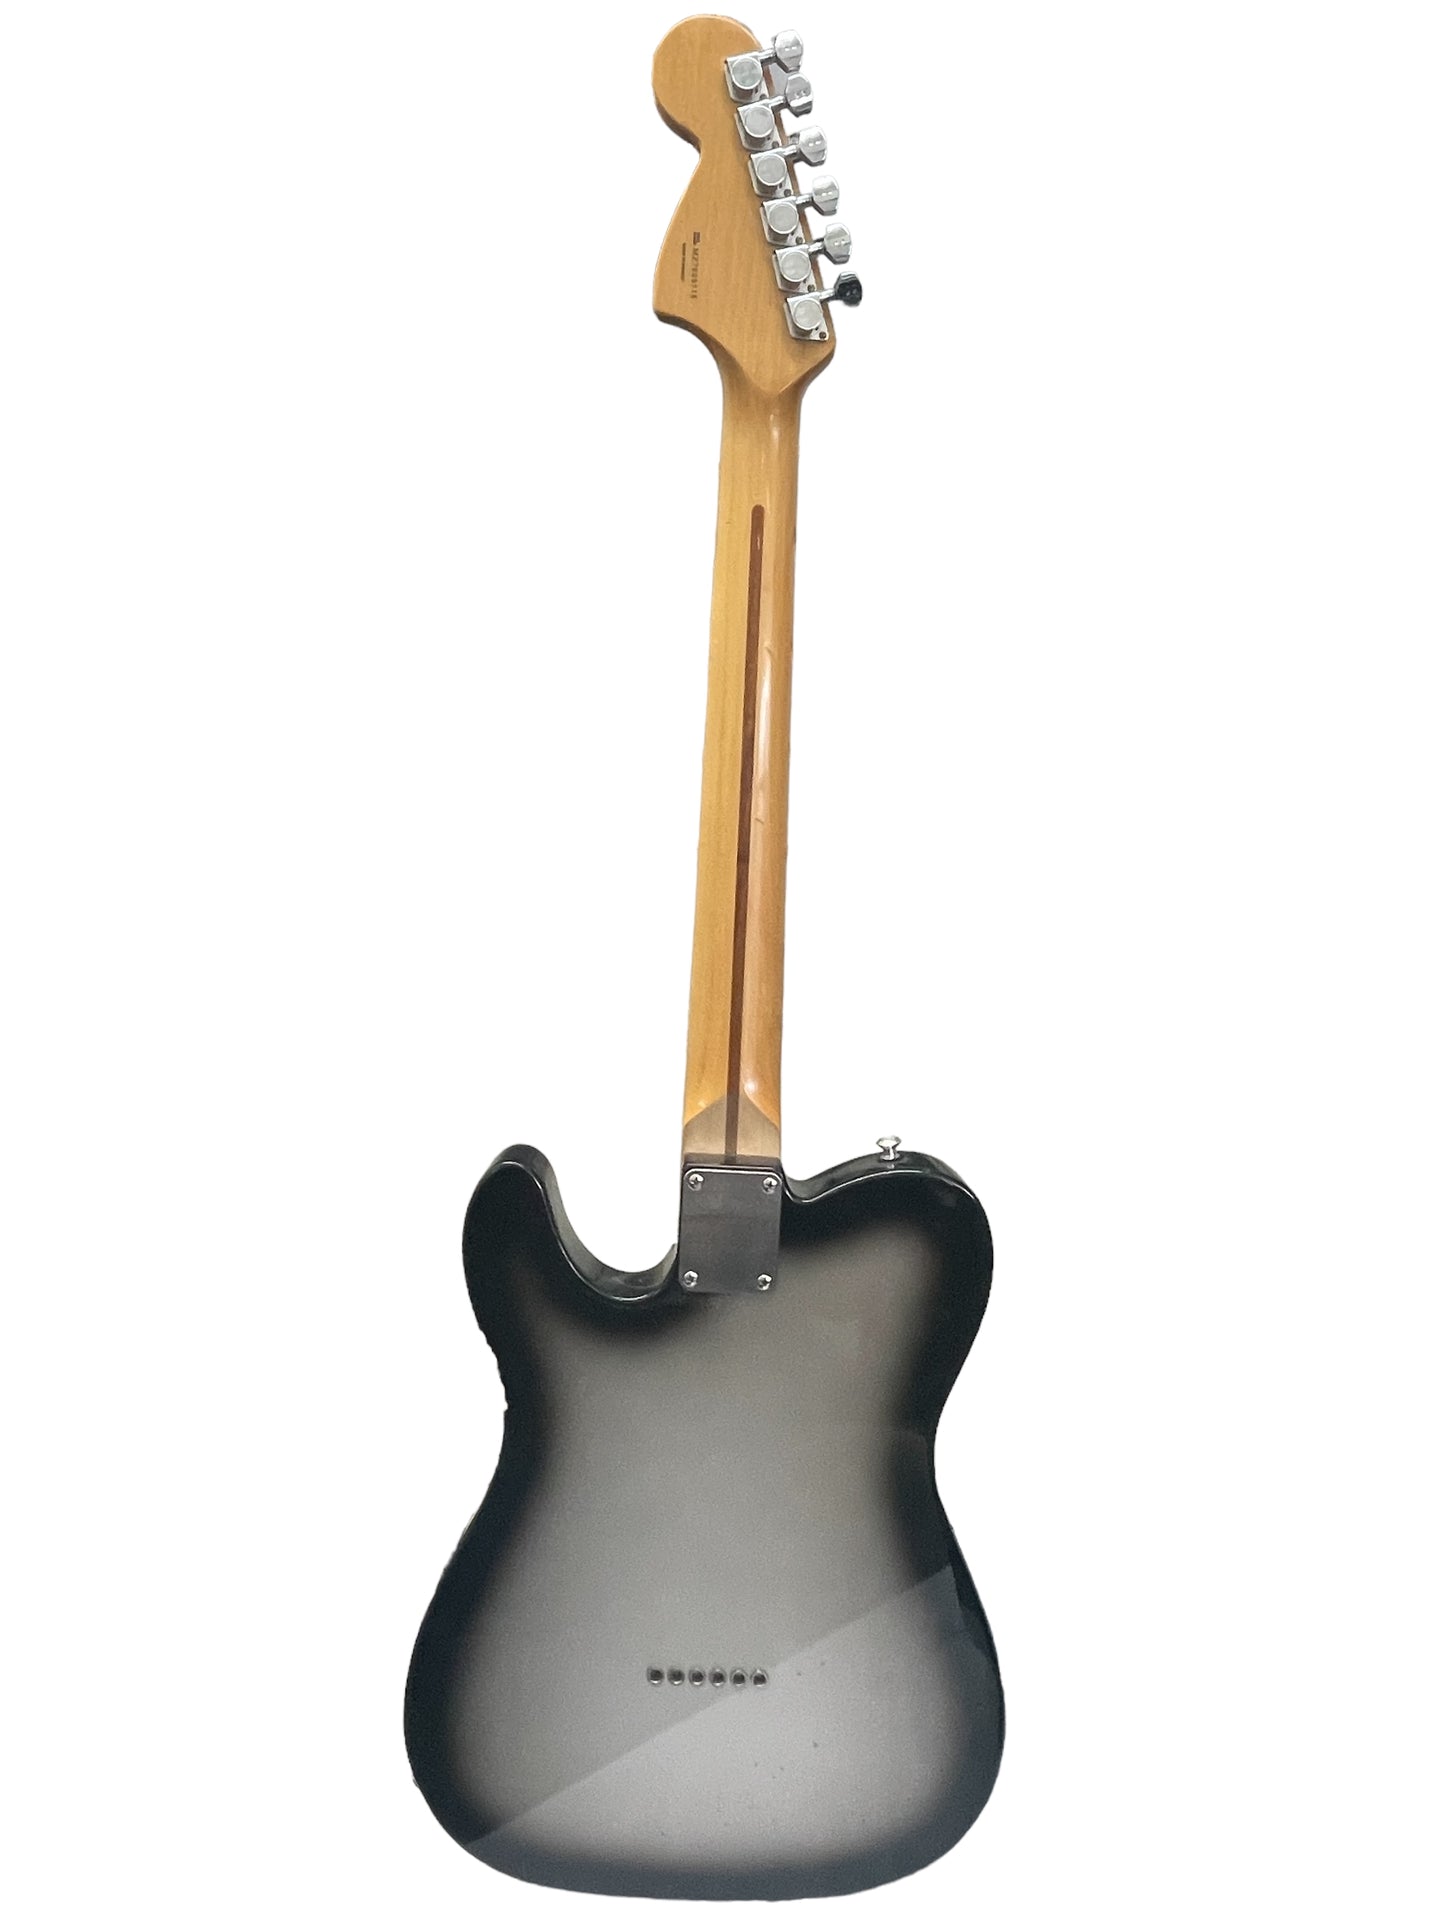 Fender Telecaster Black Tele Electric Guitar (Local pick-up only)